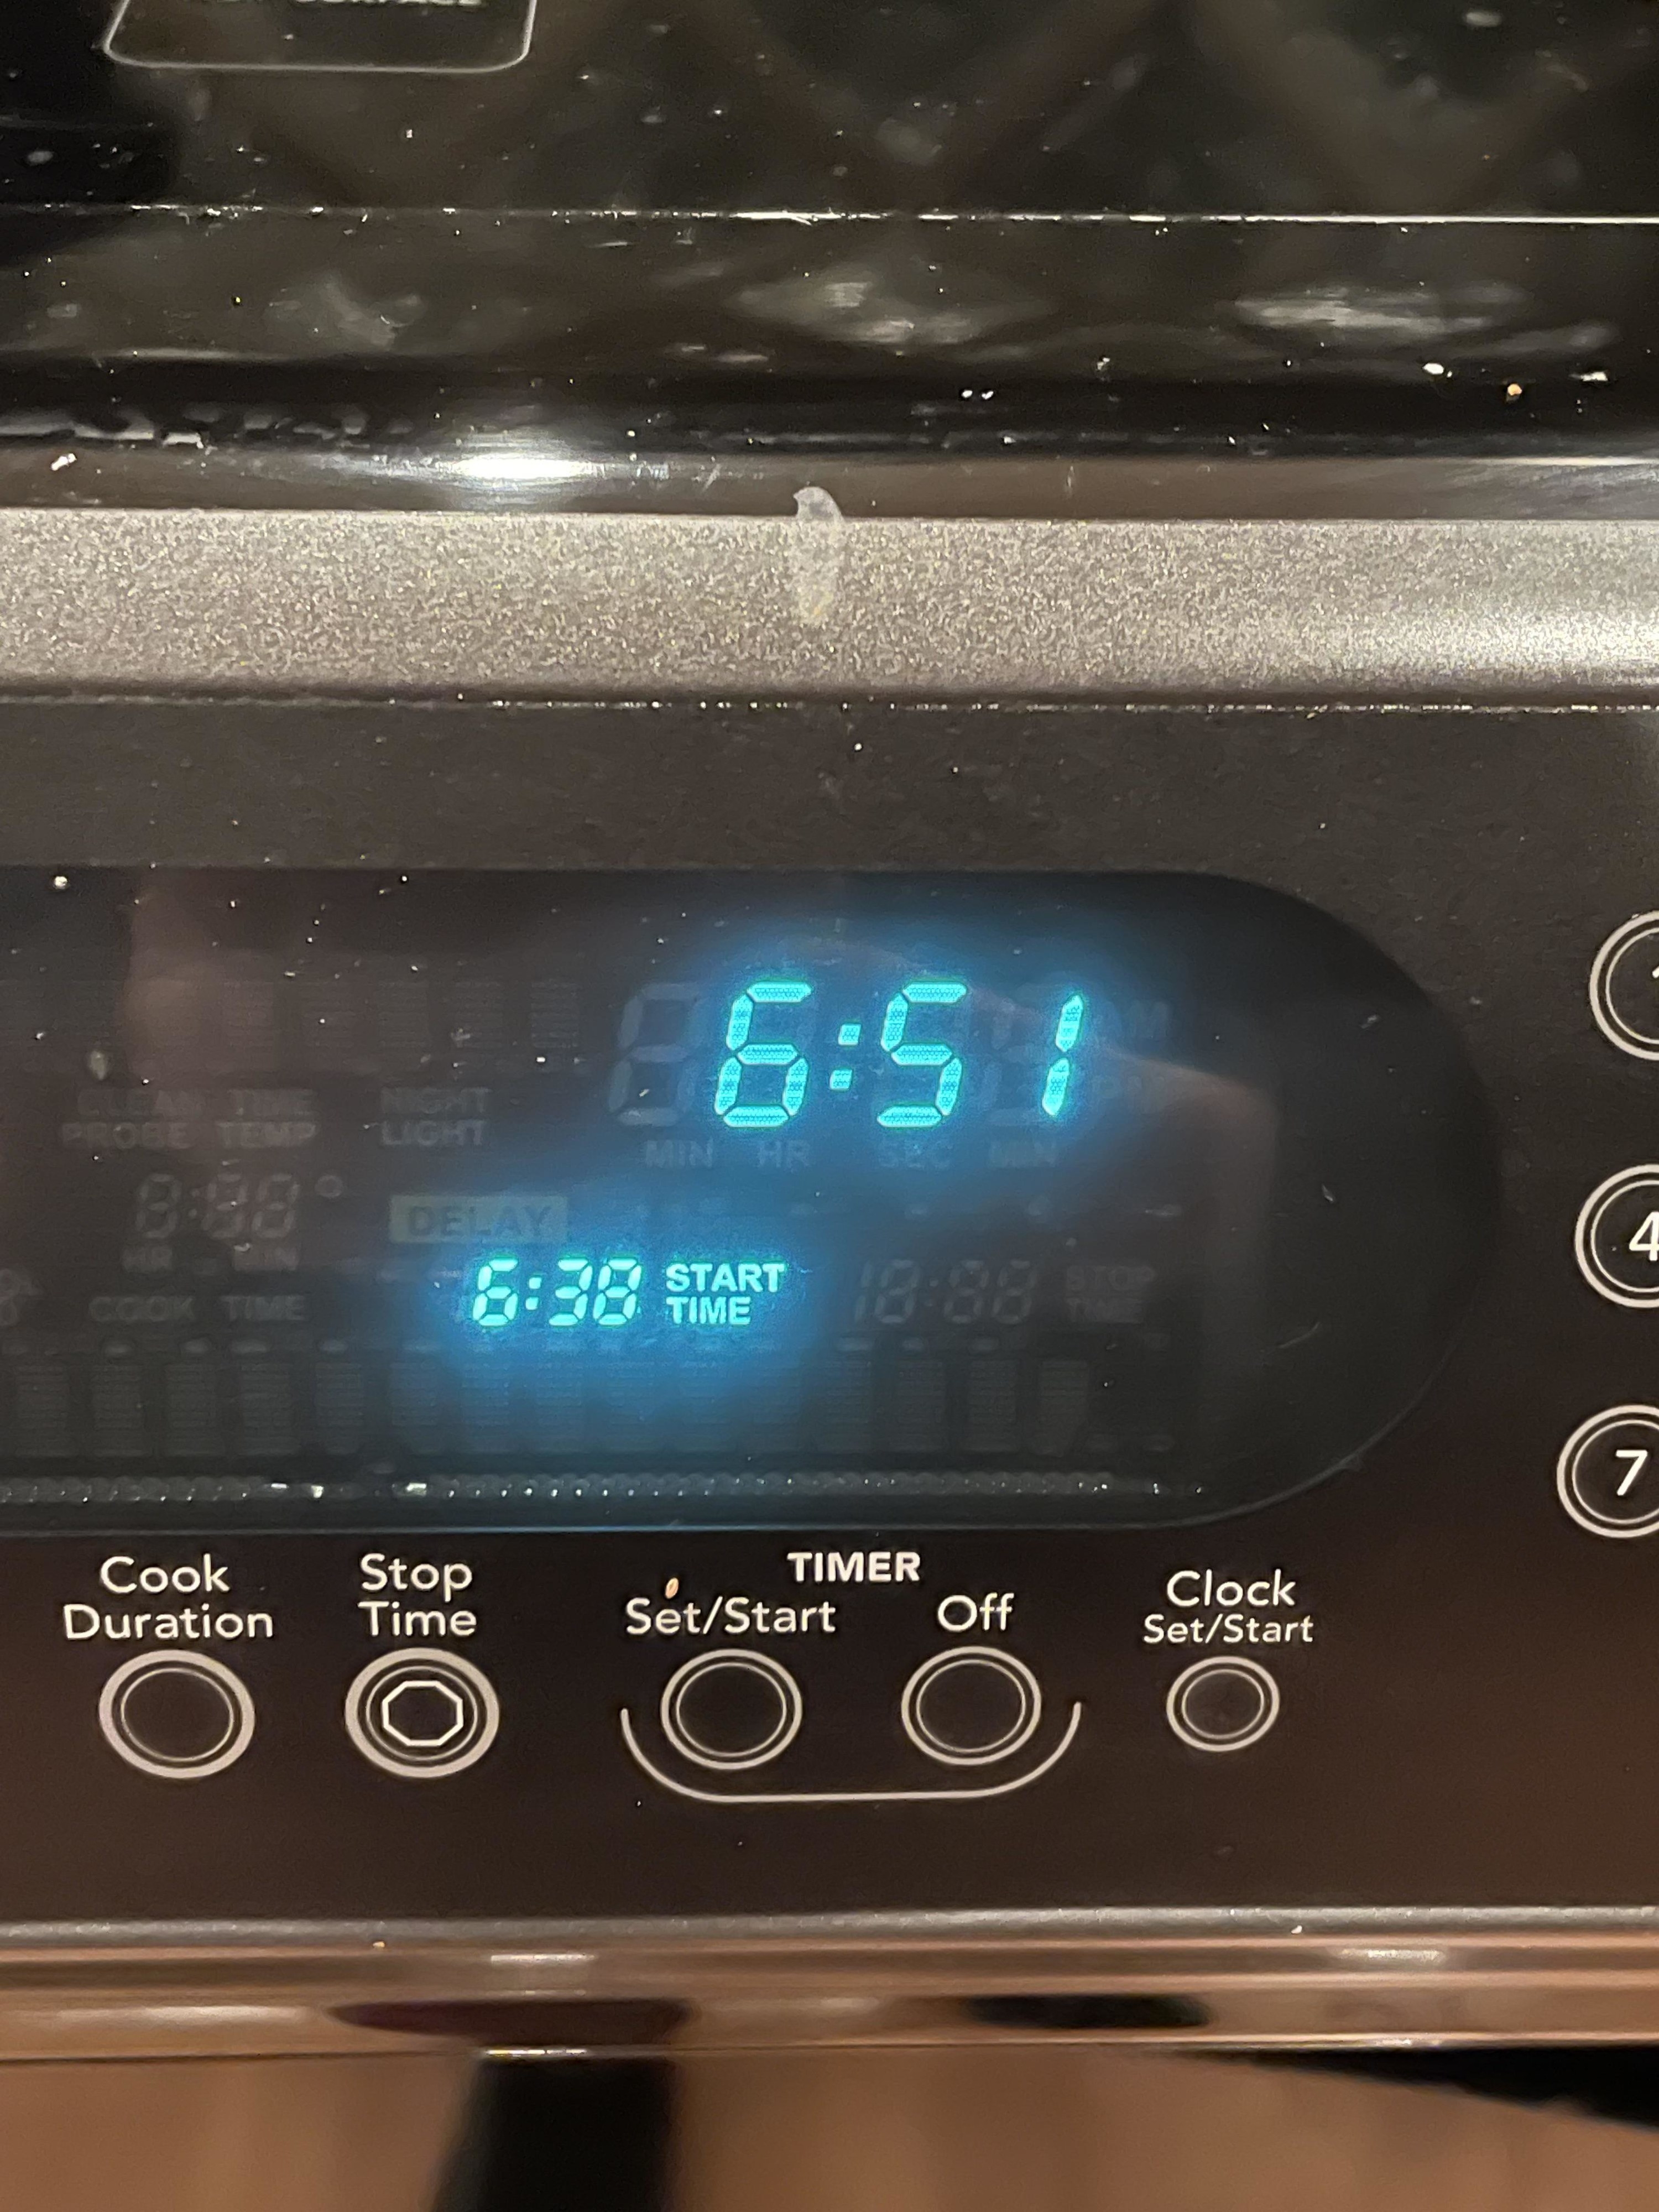 An oven that shows the start time